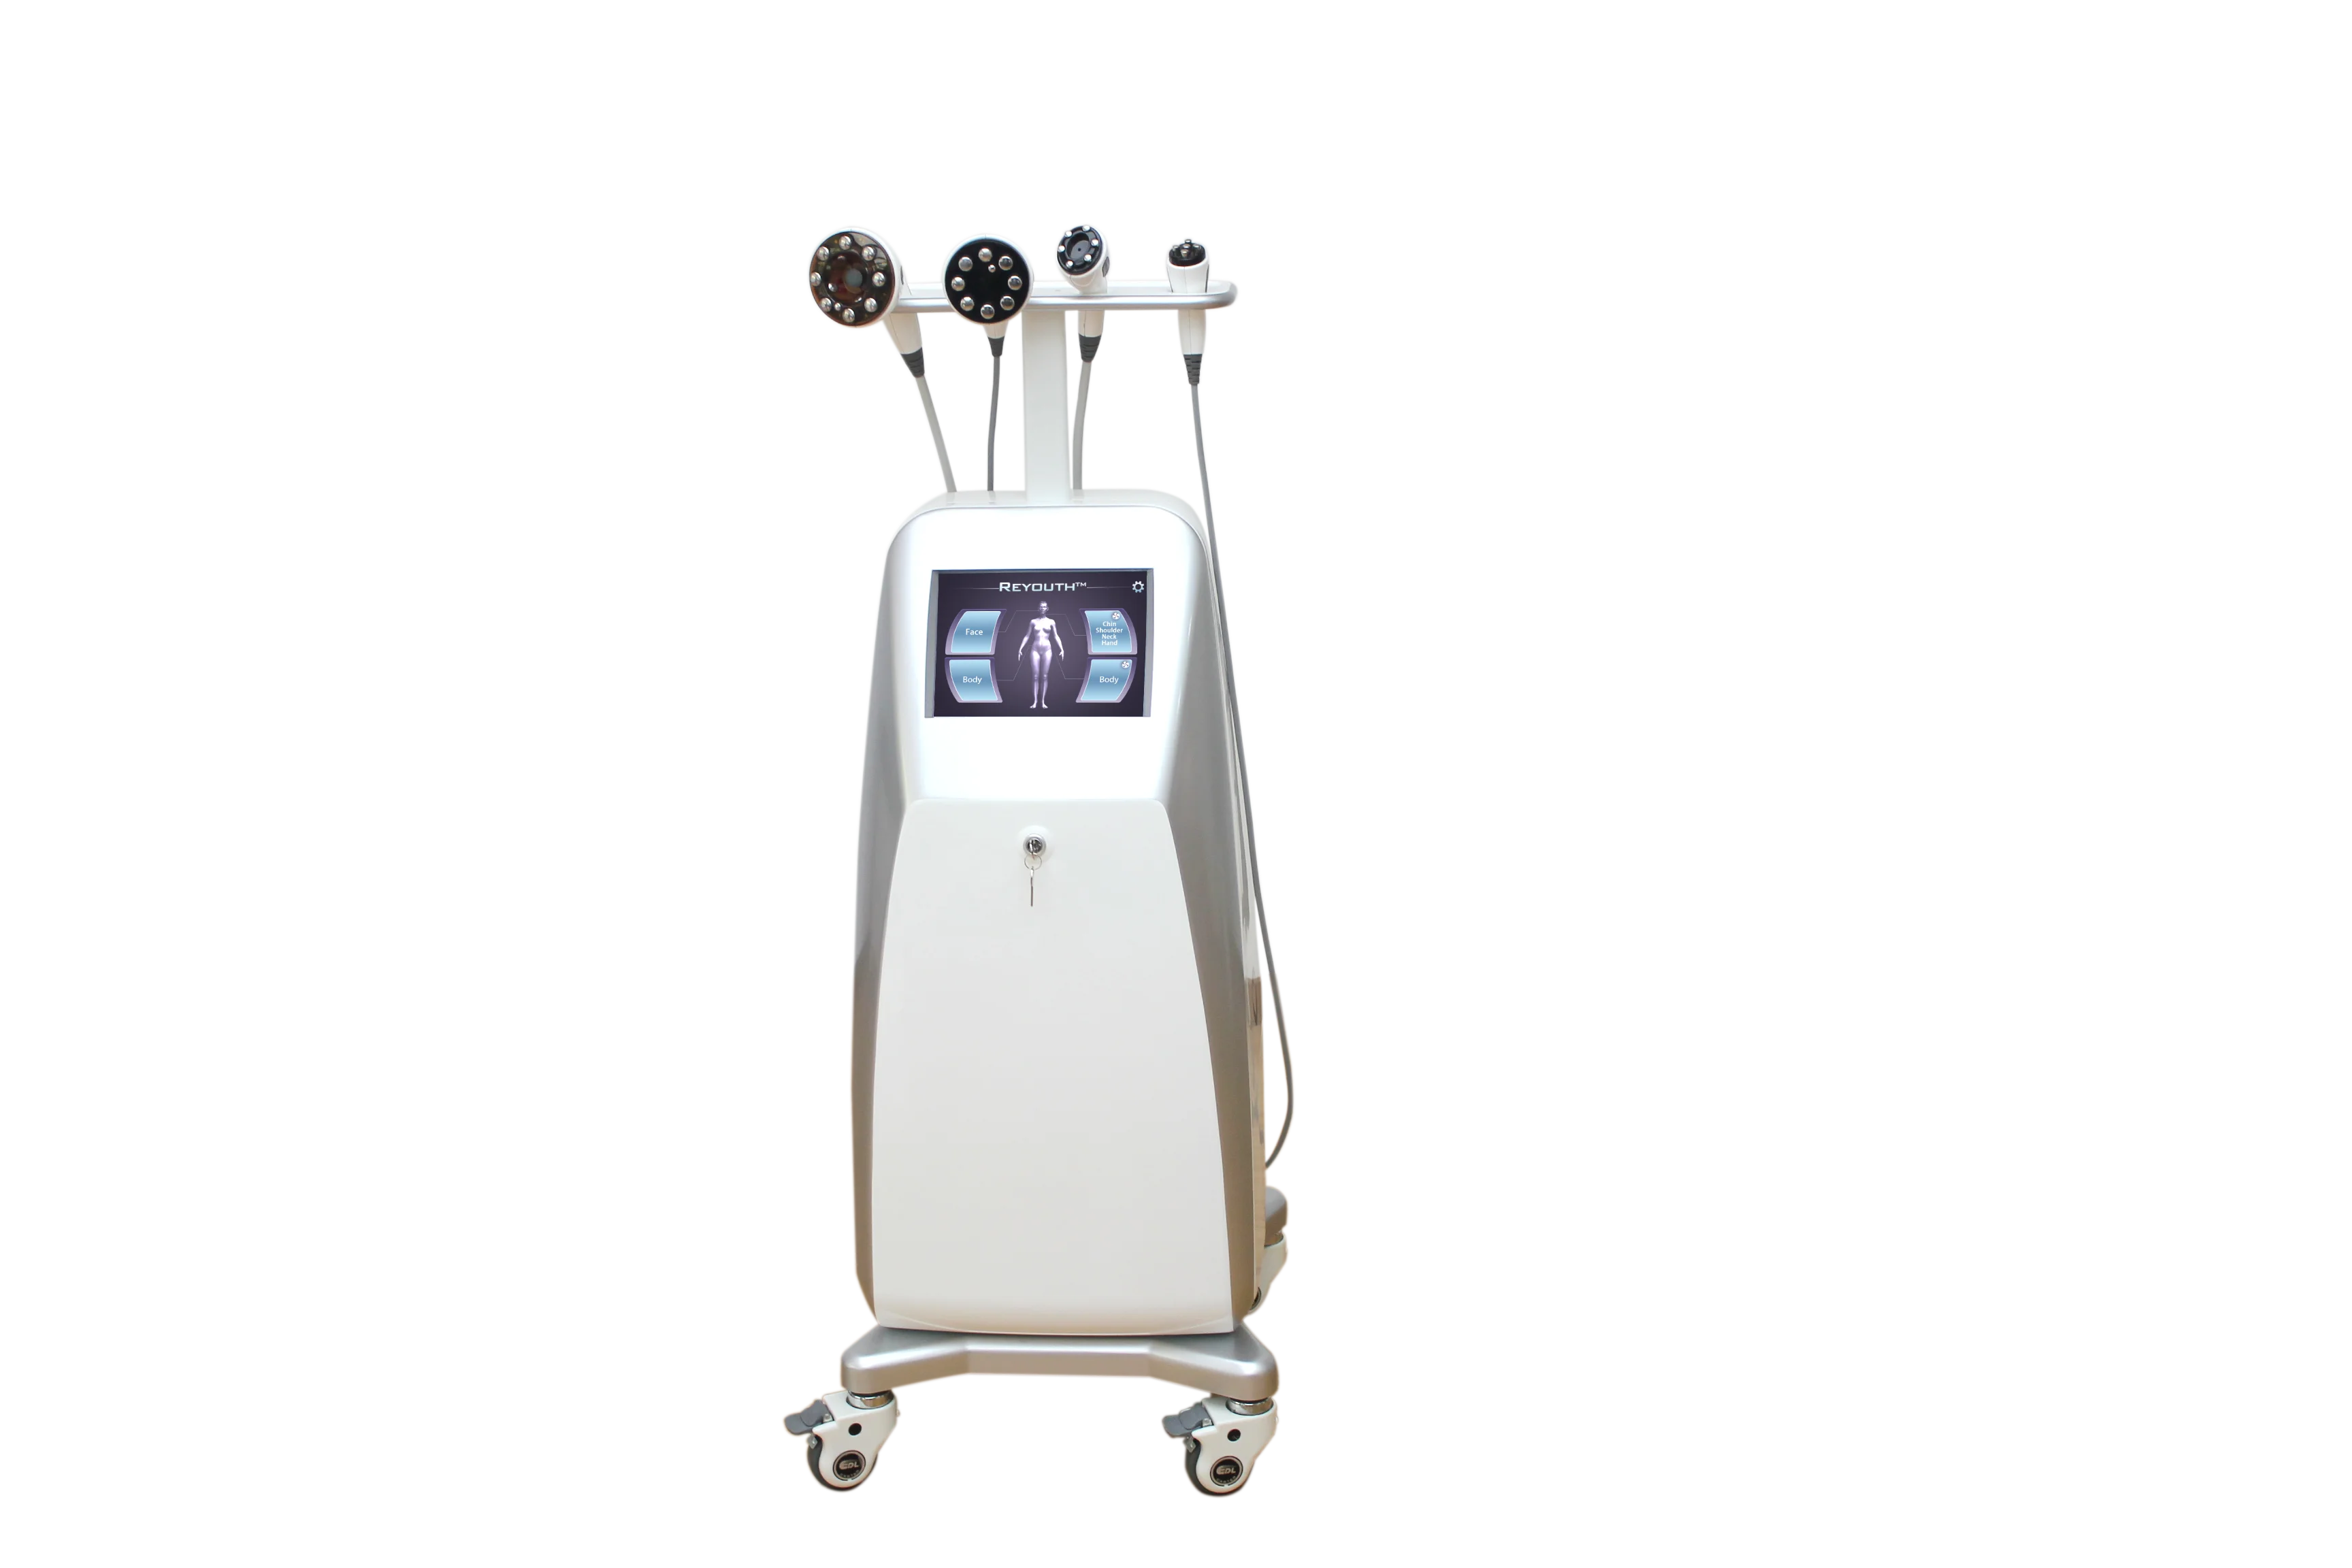 Venus Legacy Body contouring anti-aging Multi frequency modes Radio Frequency, LED, Vacuum, slimming machine